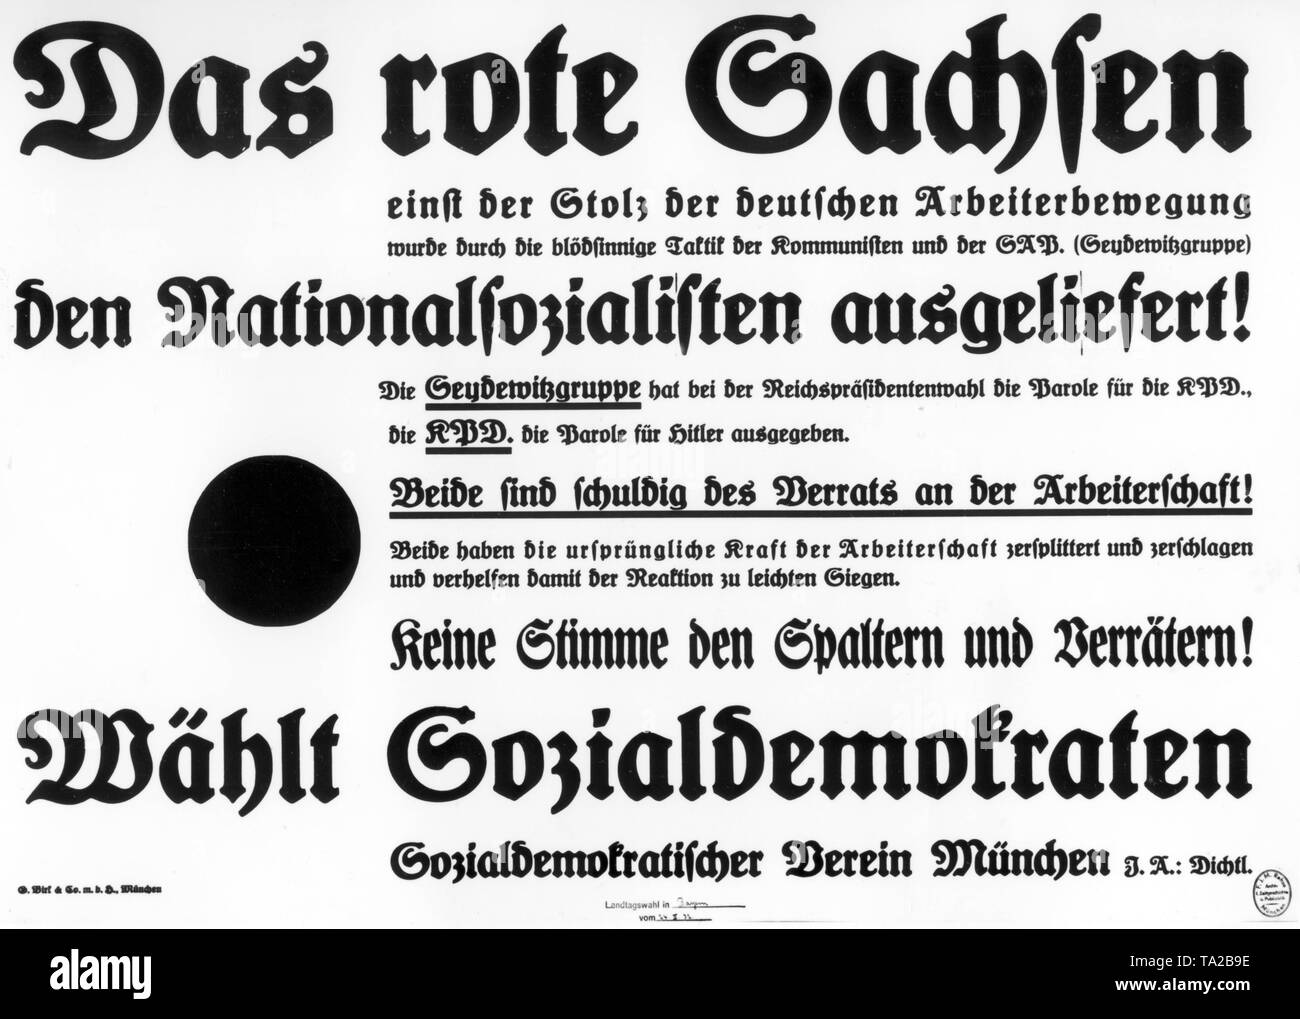 Bavarian SPD poster for the state election on 24 April 1932, which points to the behavior of the KPD and the split off of the SAP (Socialist Workers' Party of Germany ) from the SPD in the presidential election of March 13, 1932. Stock Photo